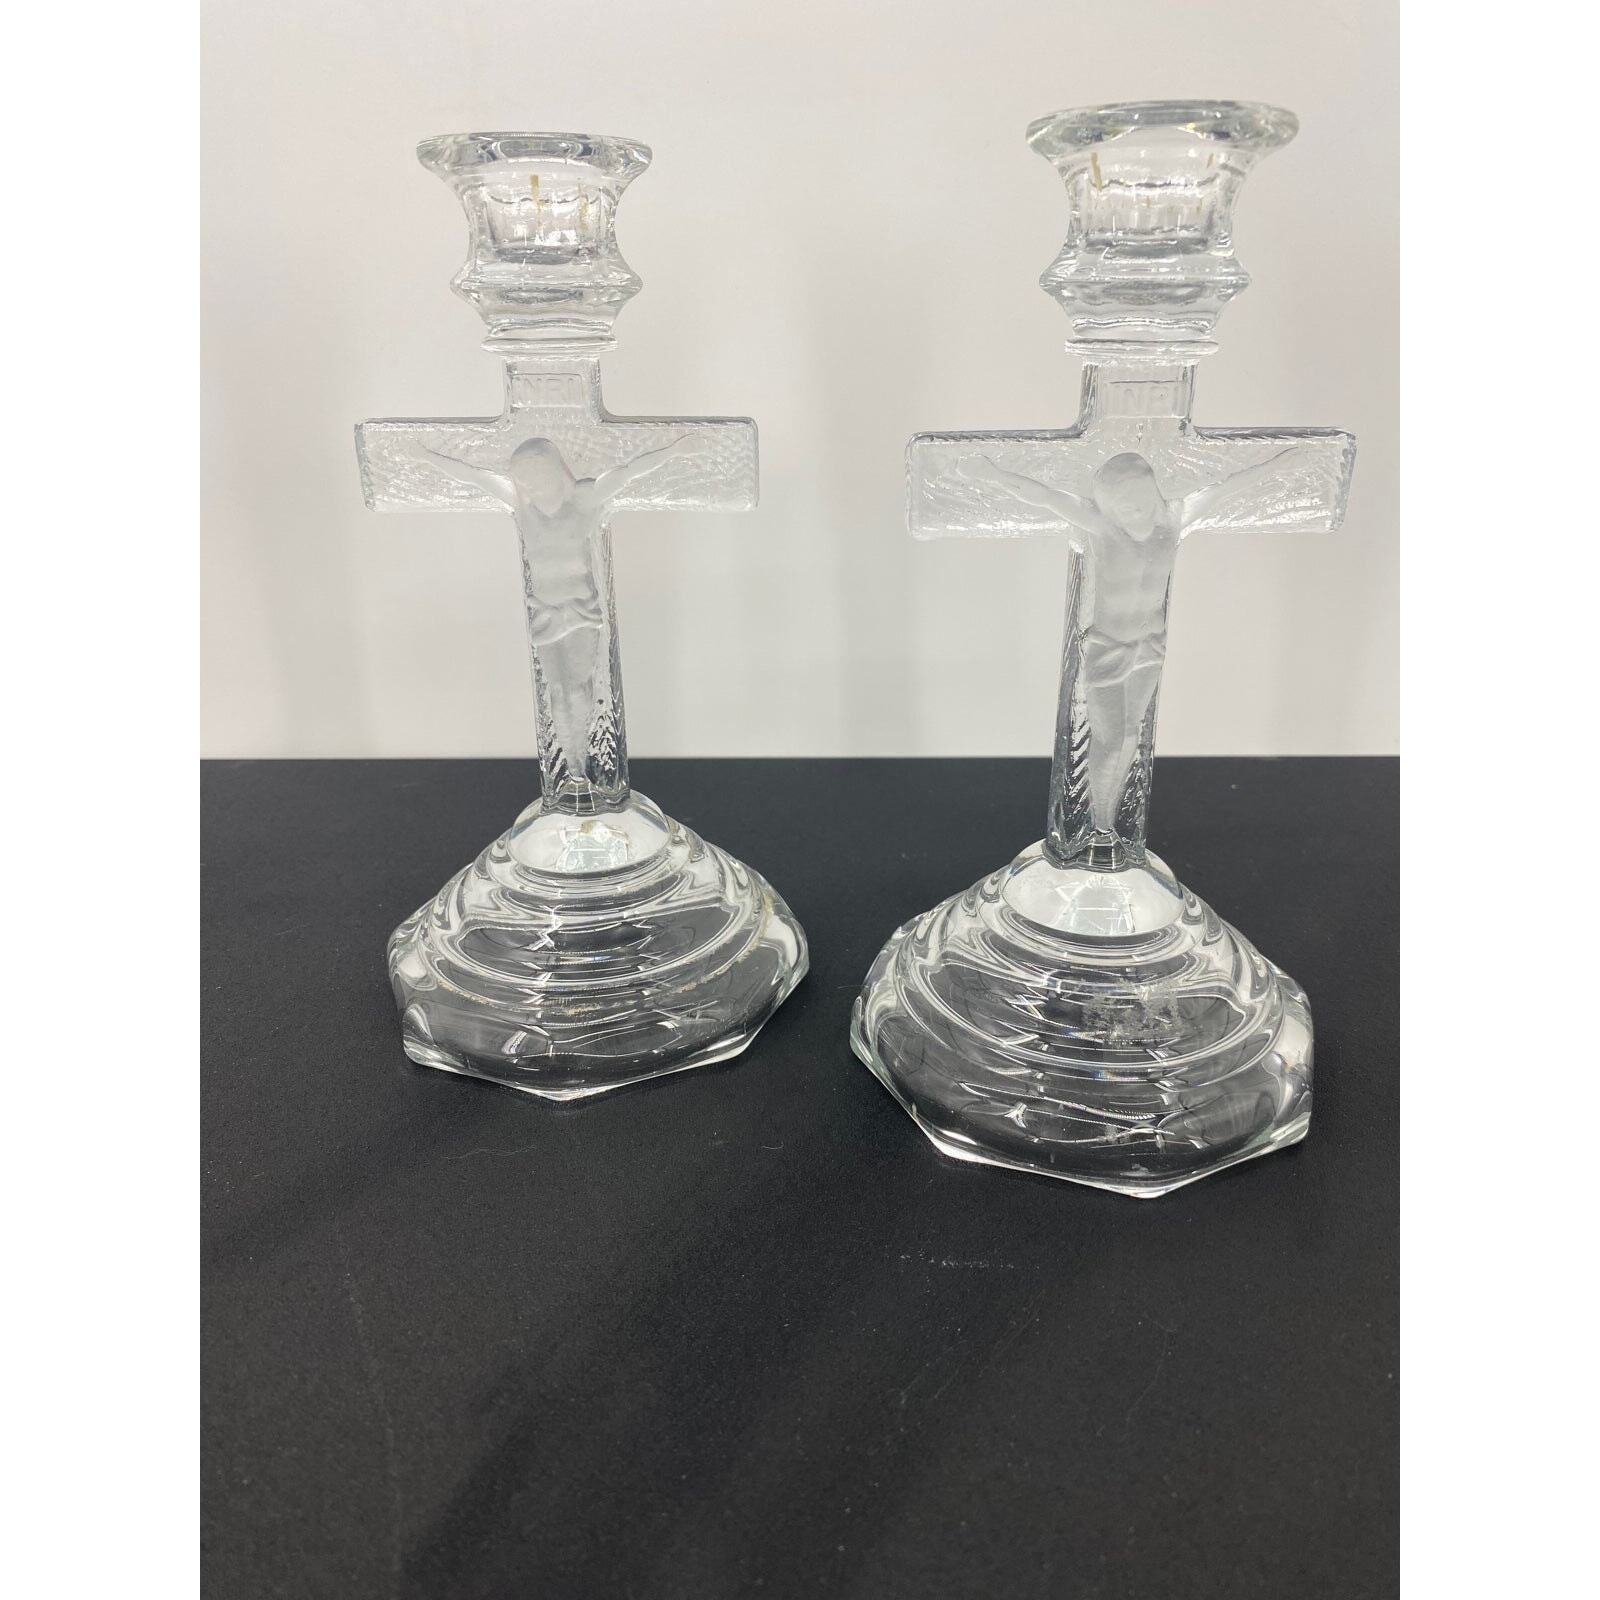 Glass Crucifix Candlestick Pair, Pressed Glass Religious Candleholder Jesus